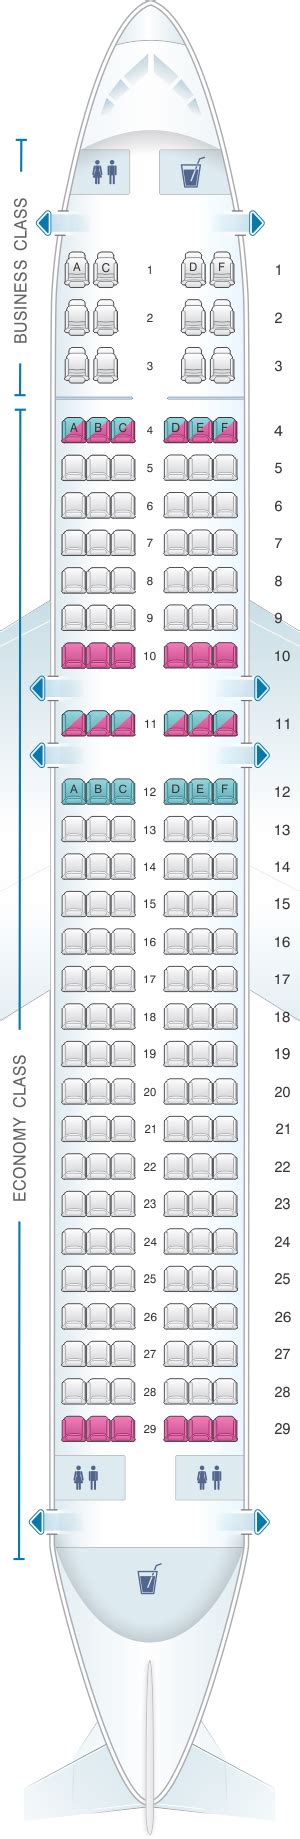 Brussels Airlines Airbus A320 Seat Map Updated Find The Best Seat